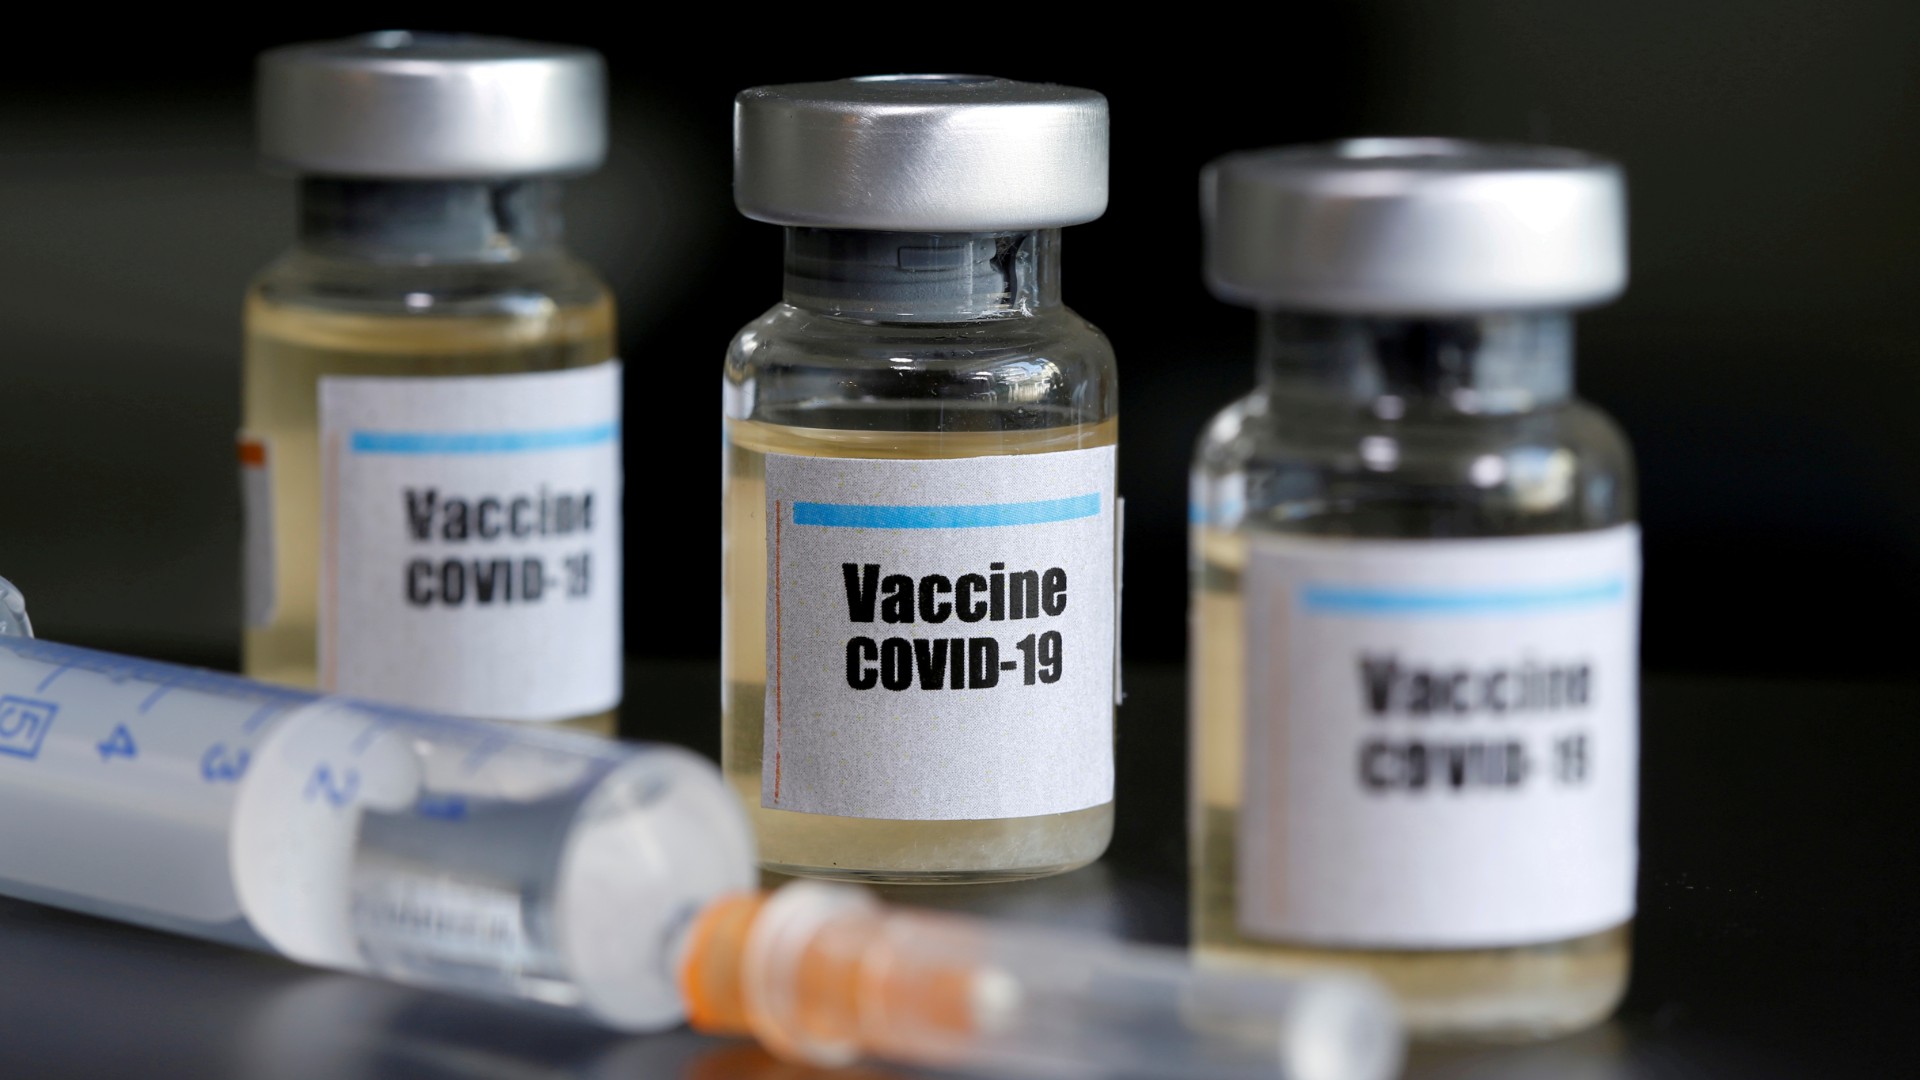 South Africa sees vaccine deal terms finalized within a month